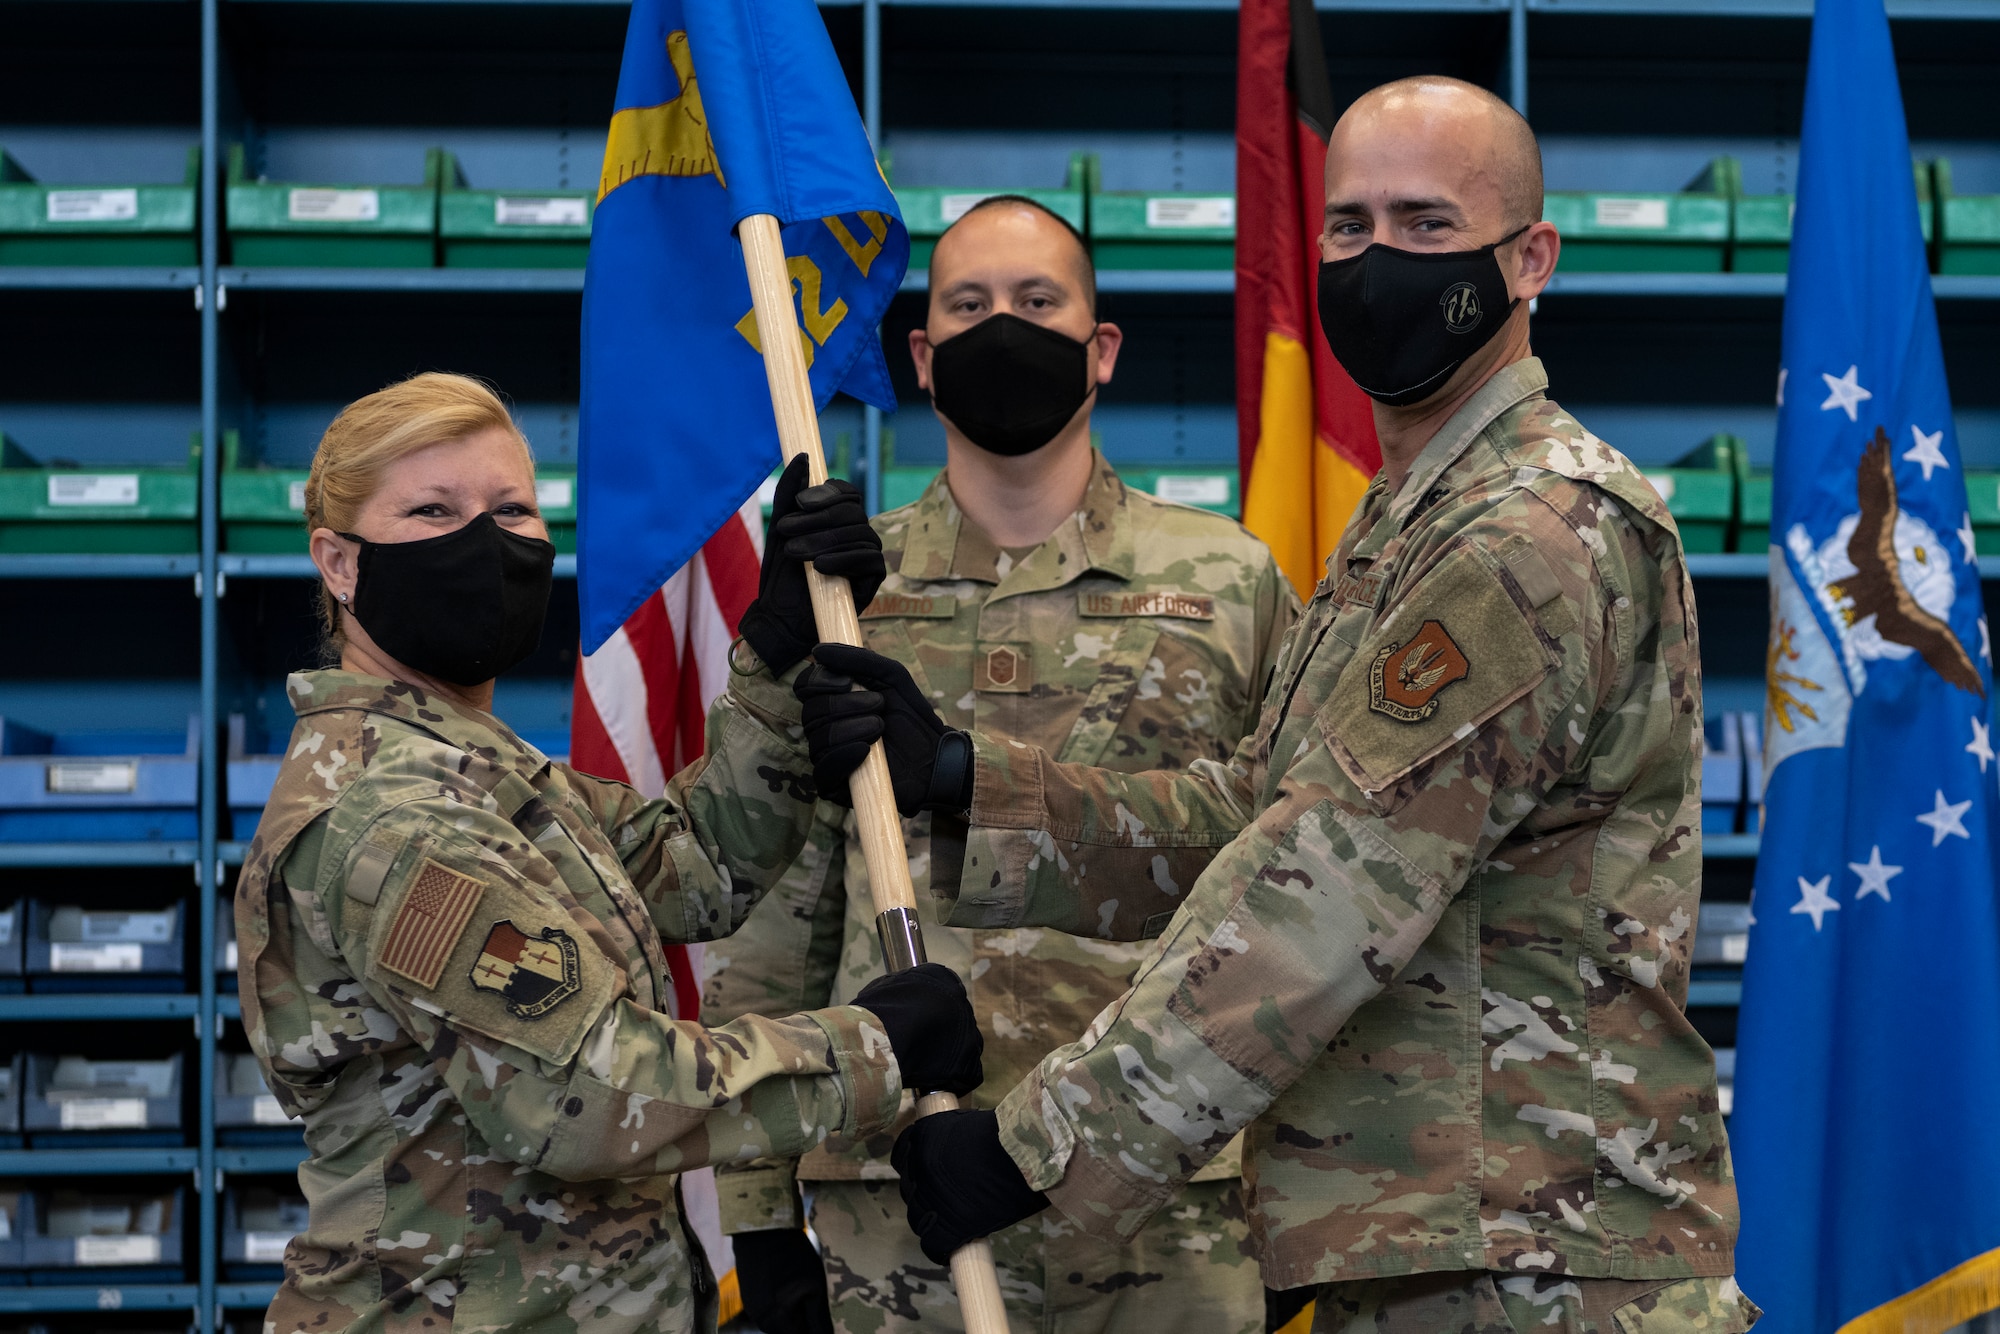 U.S. Air Force Lt. Col. Juan Fiol, former 52nd Logistics Readiness Squadron commander (right), passes the 52nd LRS guidon to U.S. Air Force Col. Betsy Ross, 52nd Mission Support Group commander, during the 52nd LRS change of command ceremony.